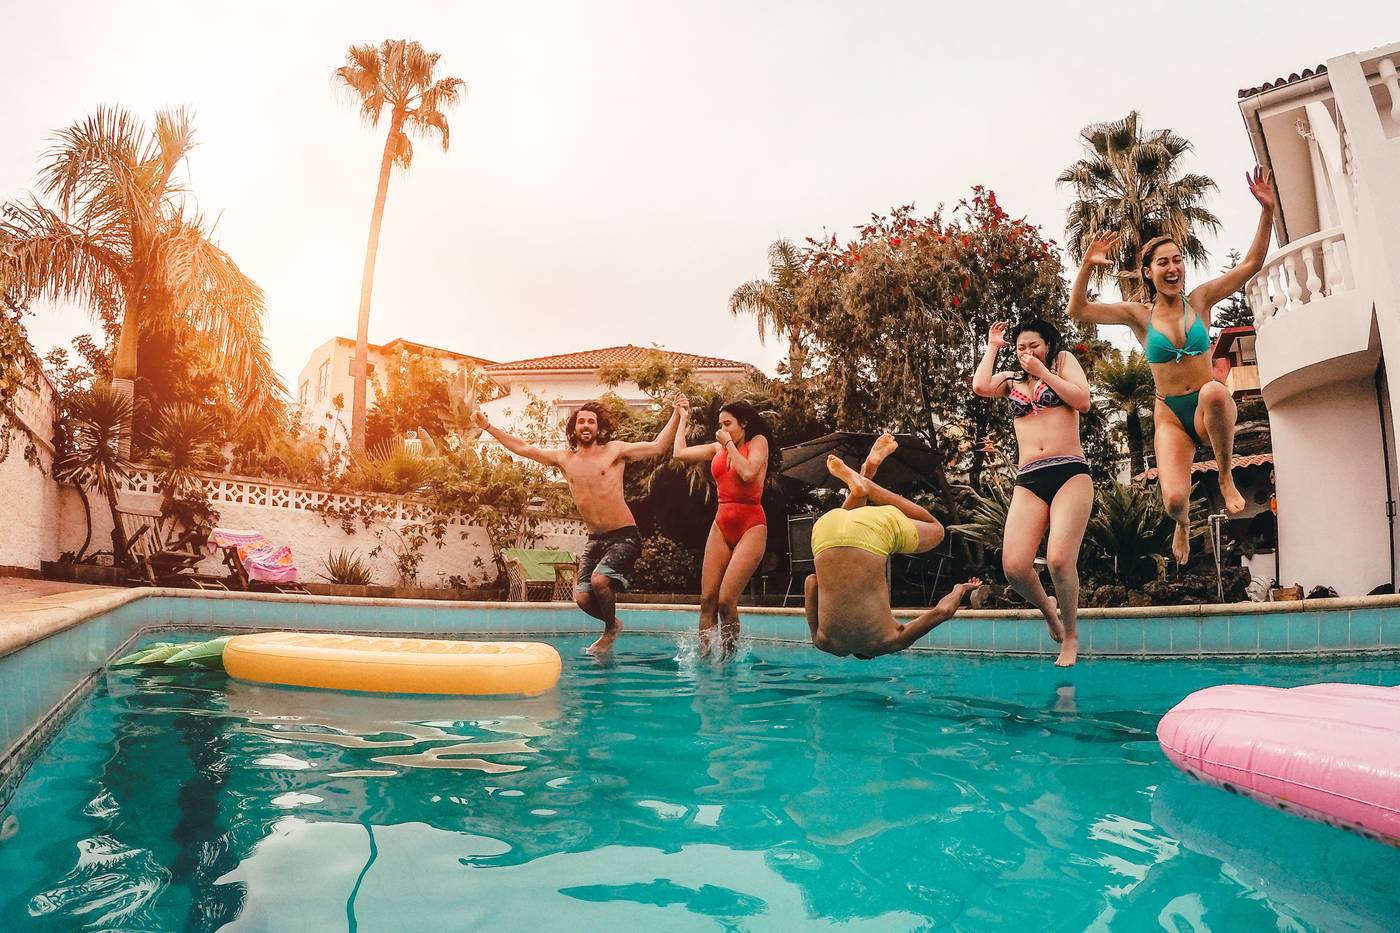 Group of happy friends jumping in pool at sunset time - Crazy young people having fun making party in exclusive tropical house - Holidays, summer, vacation and youth lifestyle concept